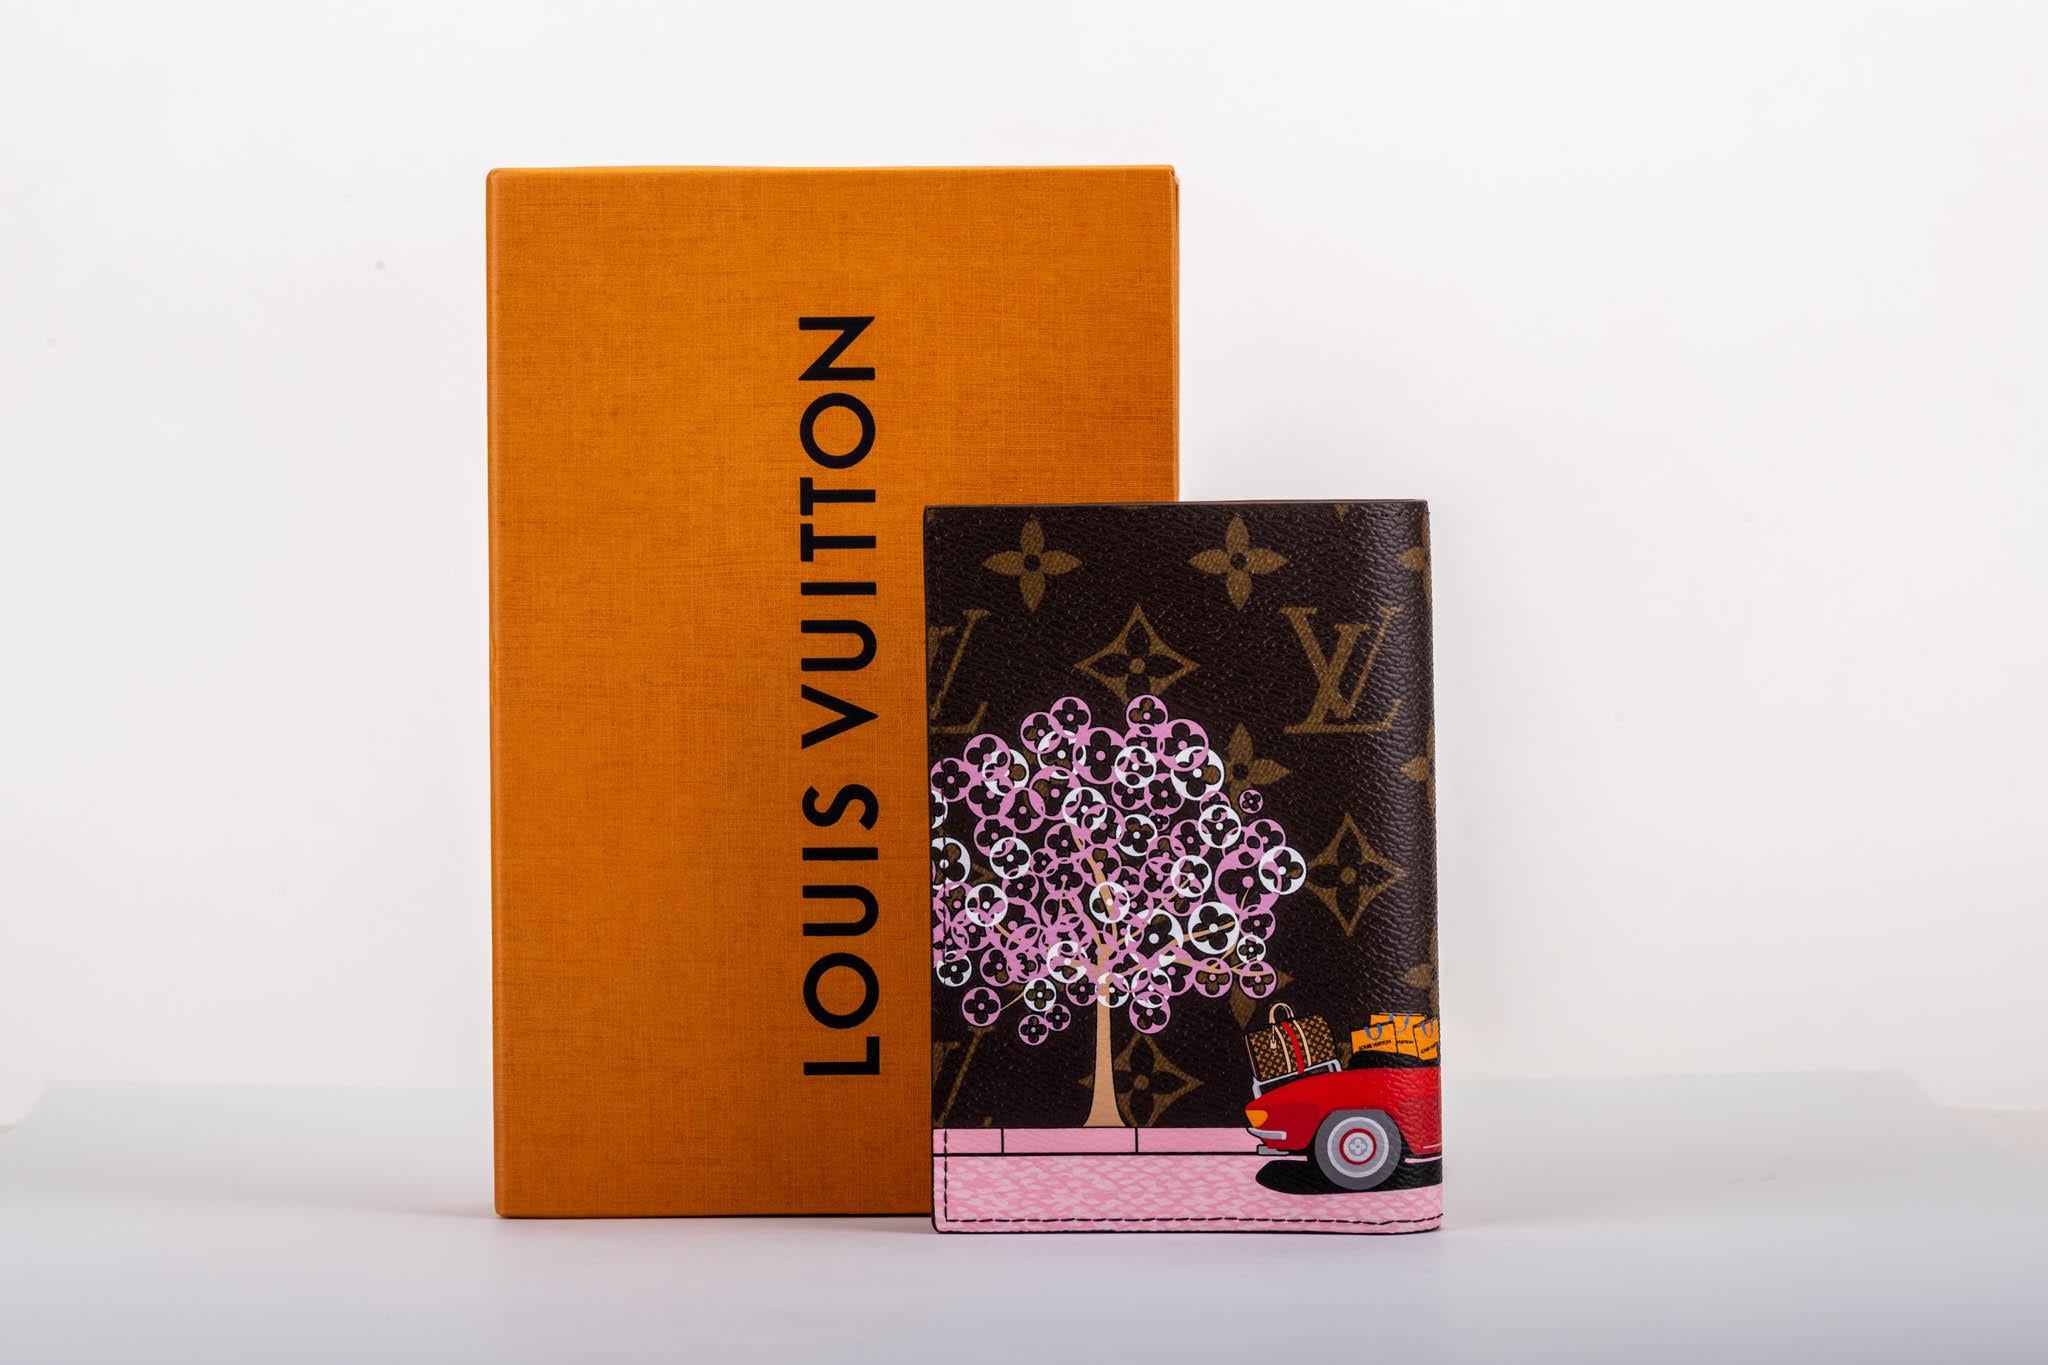 Louis Vuitton Sold Out Christmas 2019 limited edition Paris passport cover. Coated monogram canvas with contrast red interior leather. Comes with dust cover and box.